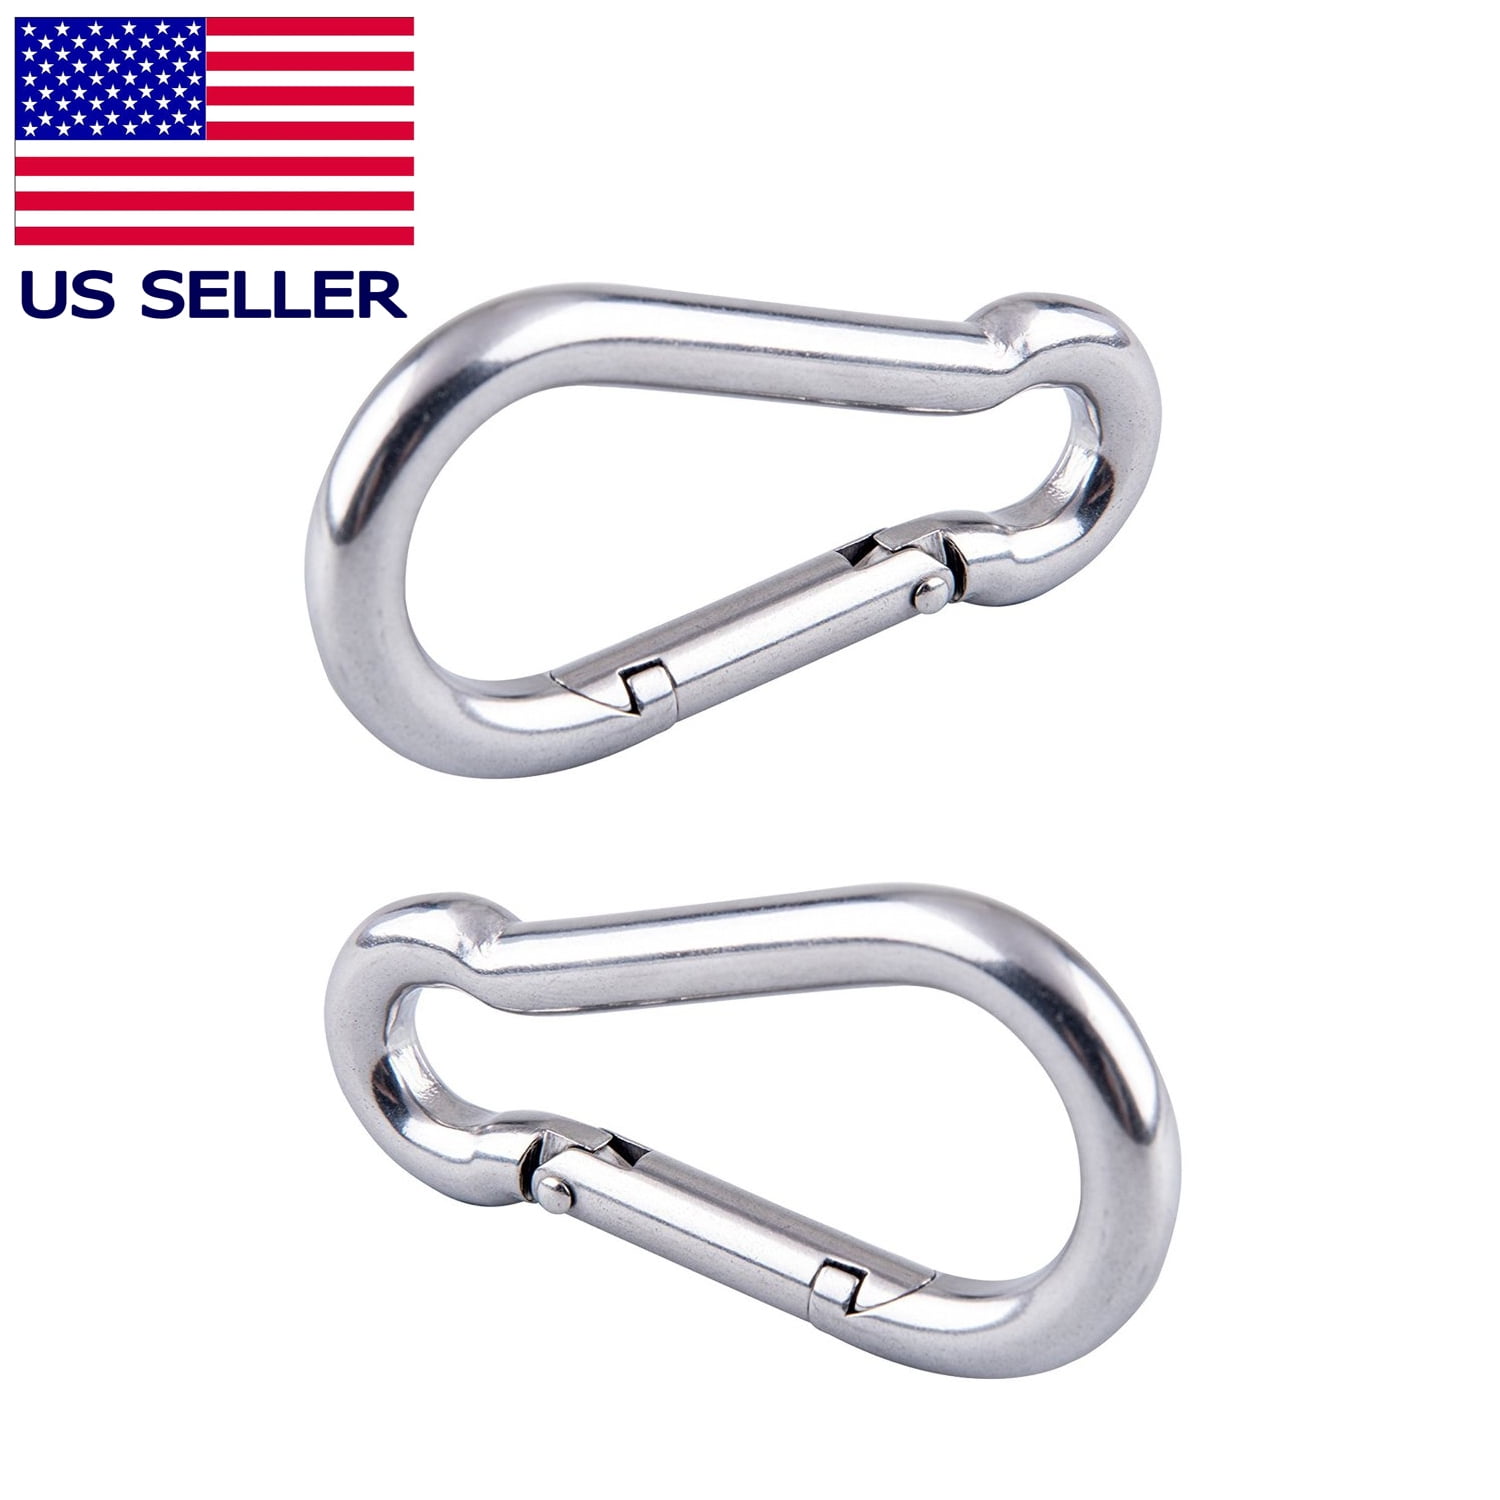 Fitness Strength Training Snap Hooks Gym Accessories Home Gym Hanging Attachments Clips Exercise Machine Equipment -